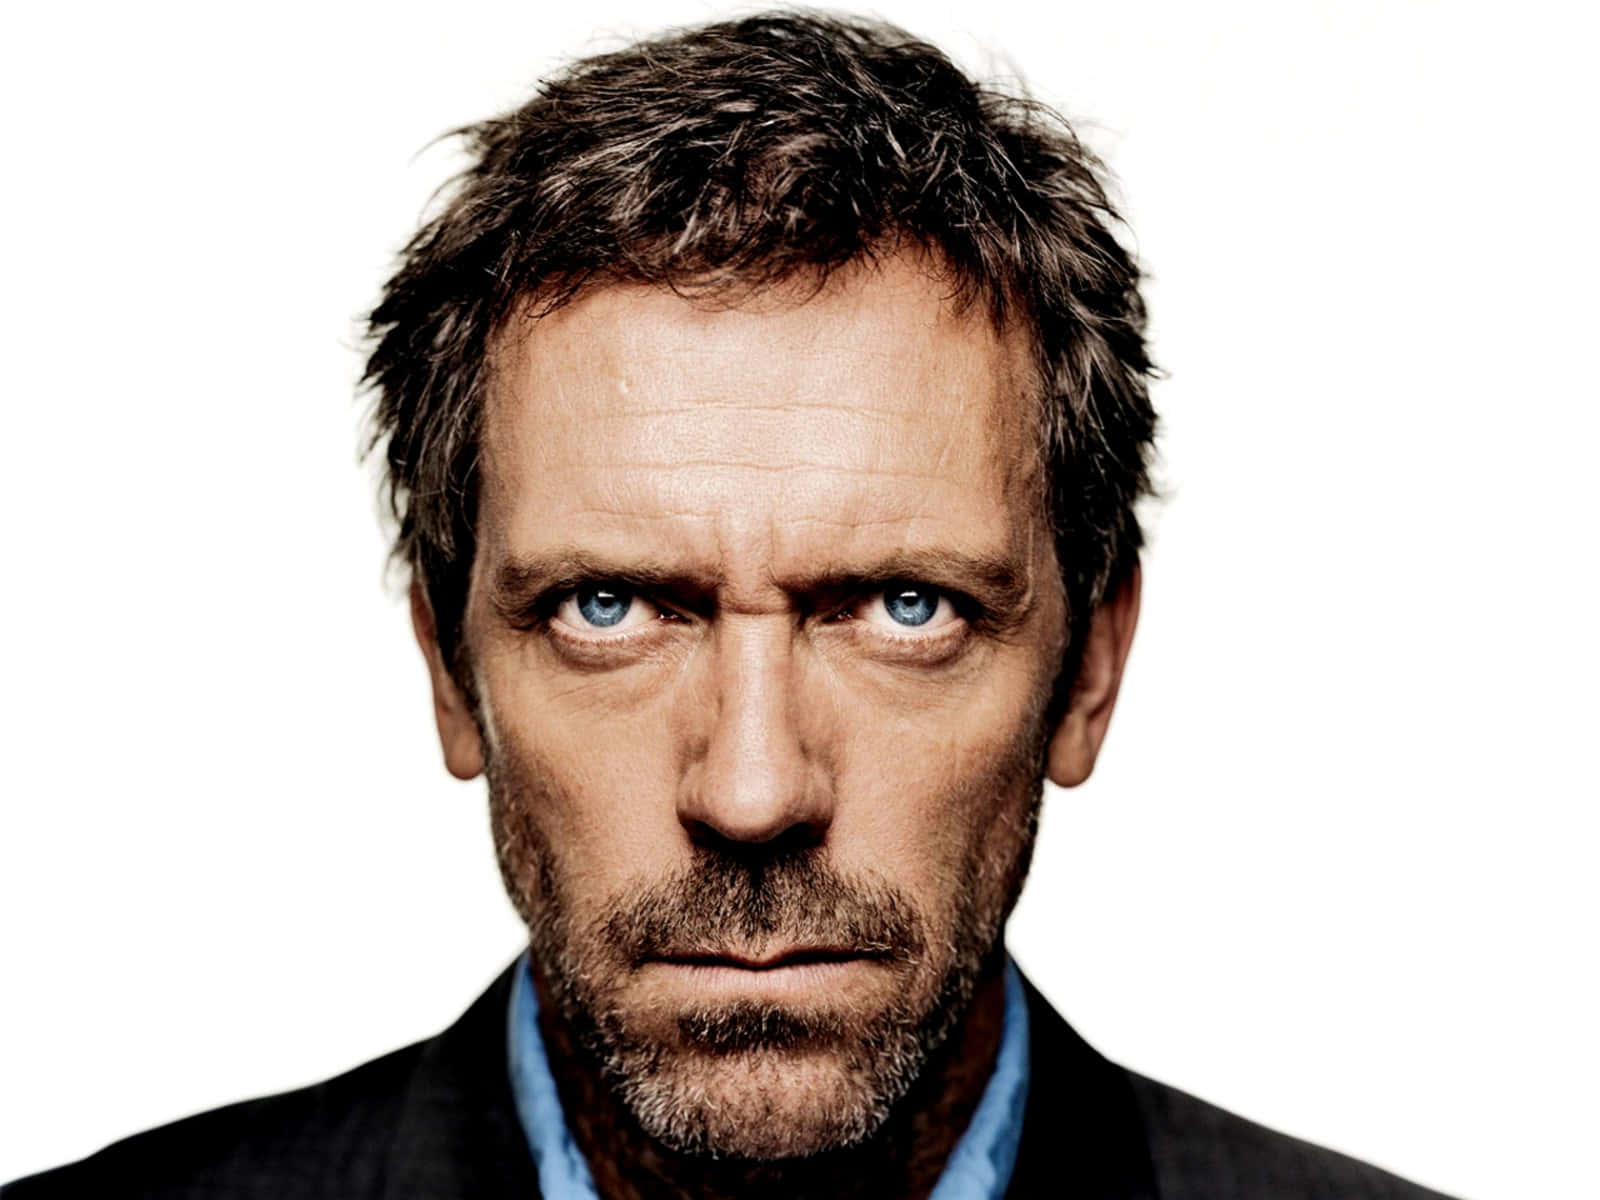 Manface Actor Hugh Laurie Would Be Translated To 